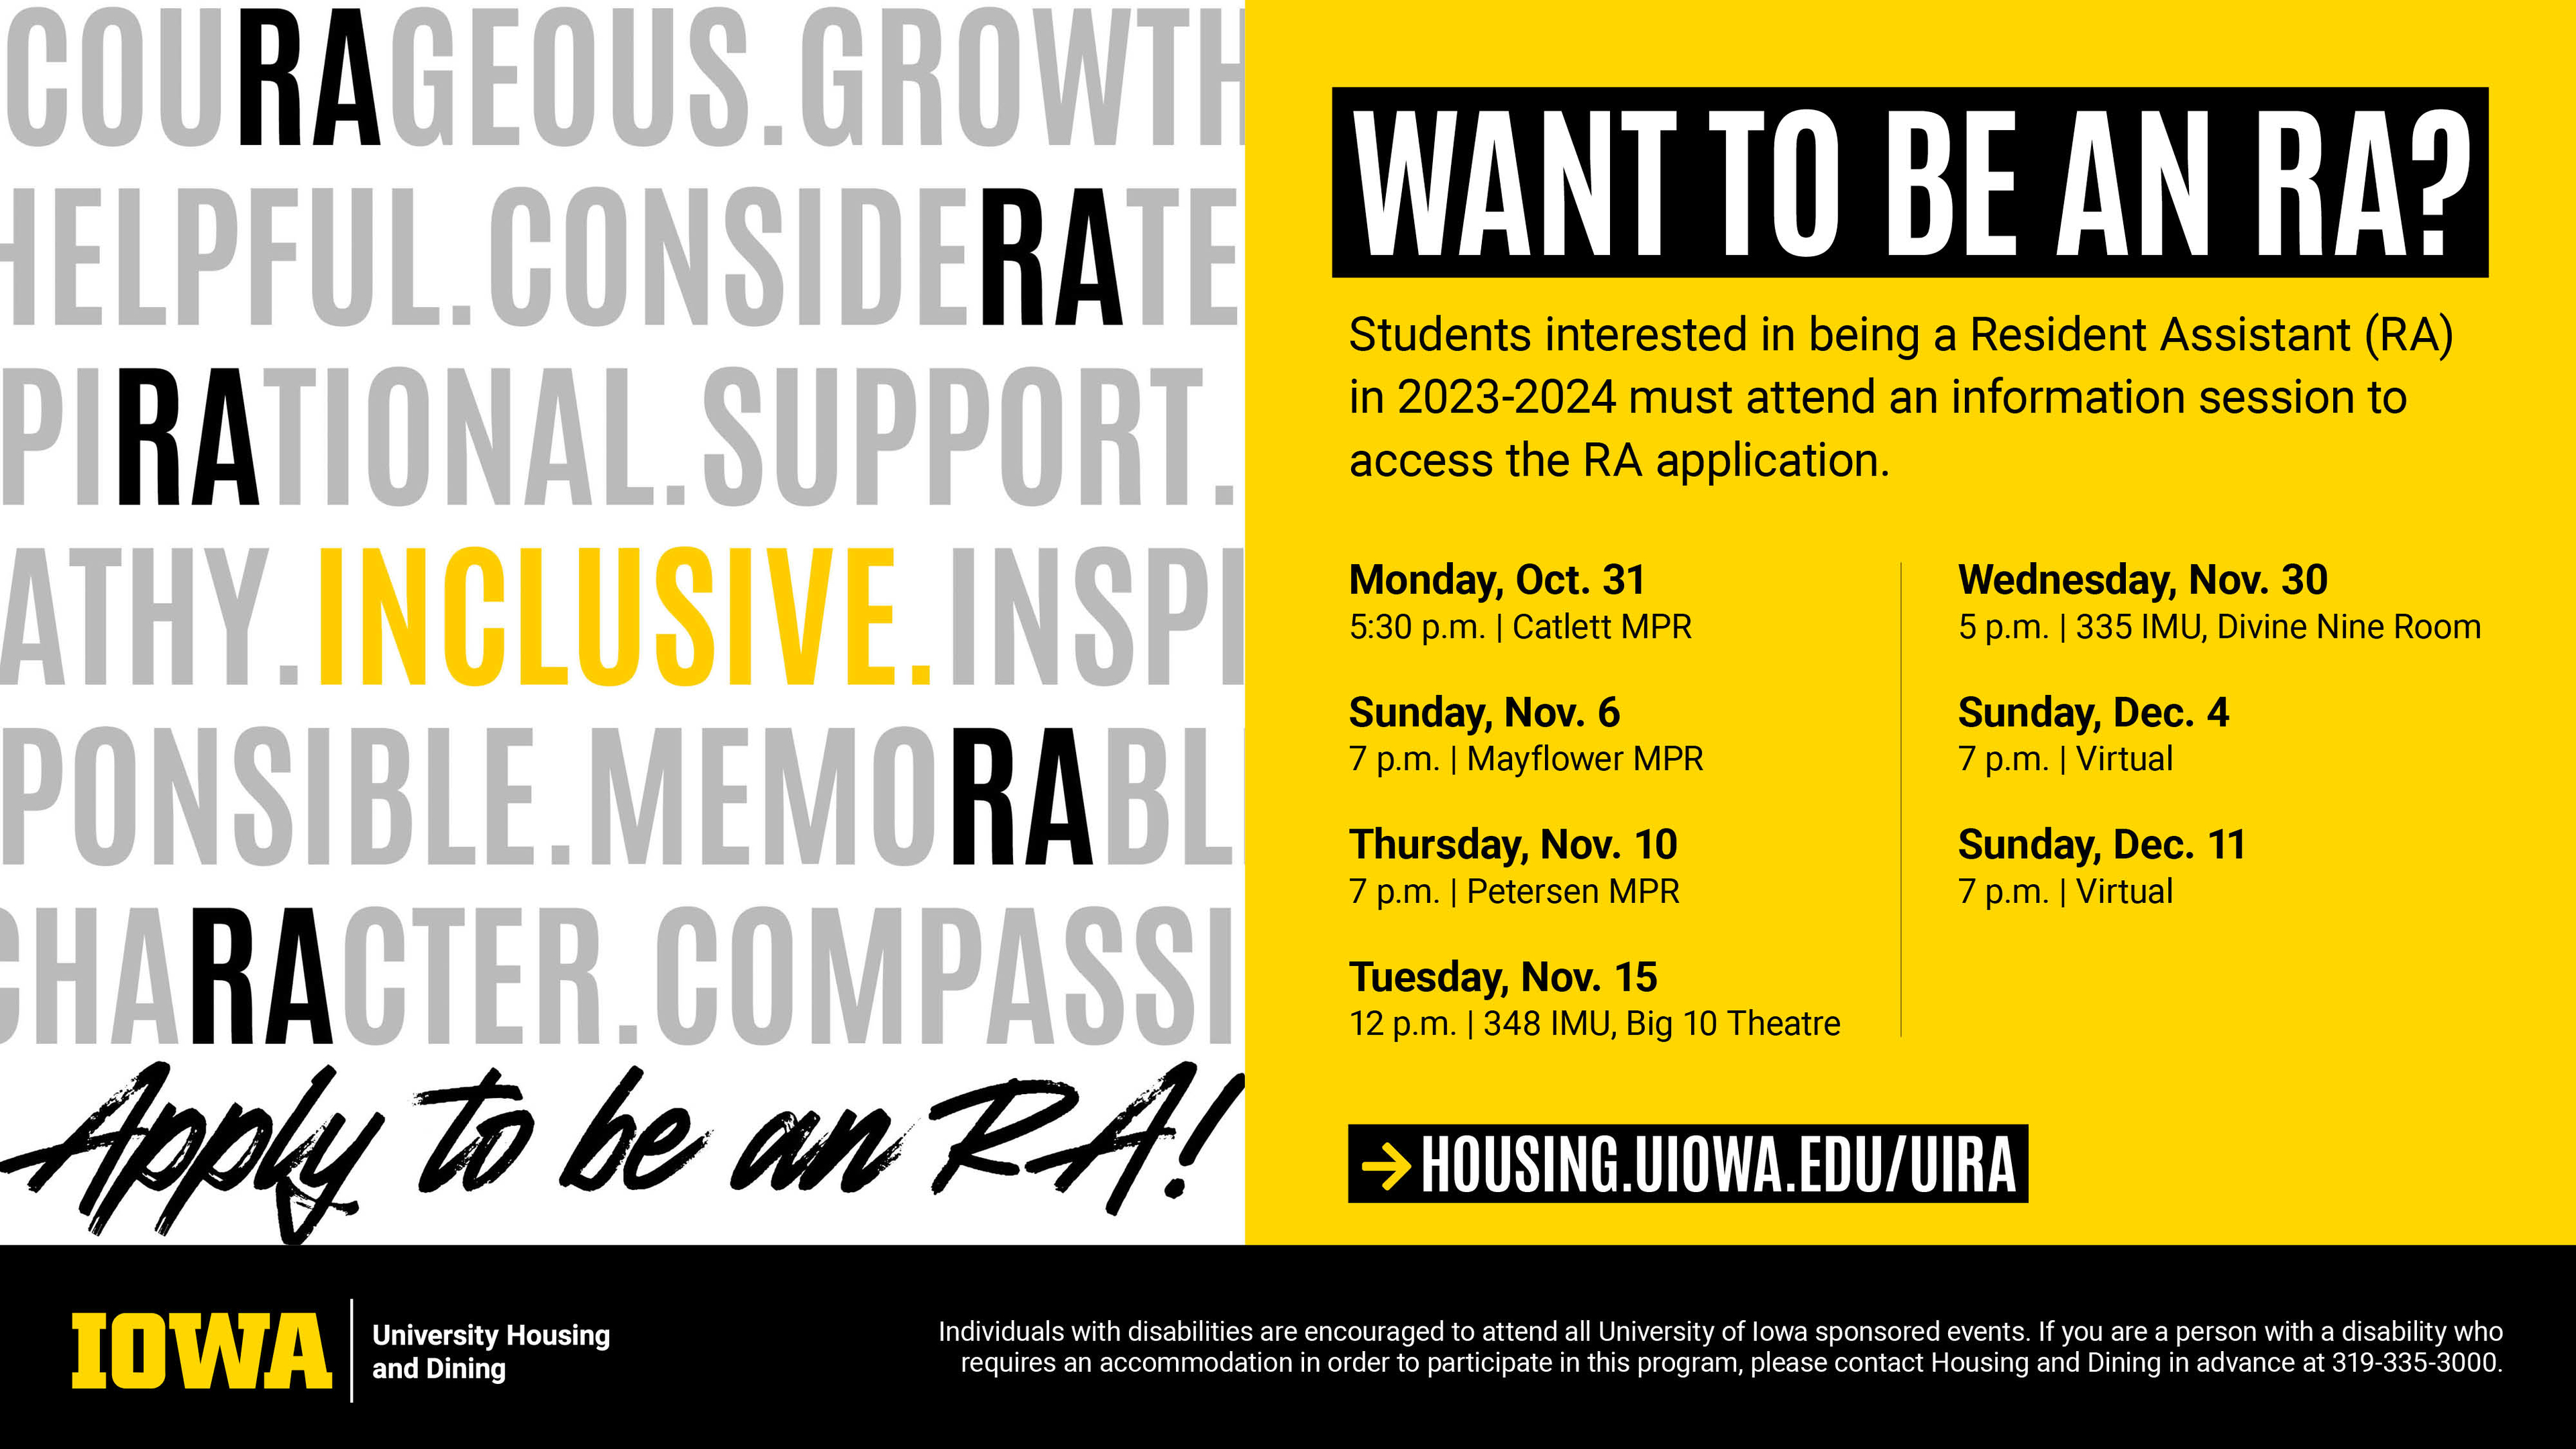 Want to be an RA? Application is due Thursday, December 15 at 11:59PM.